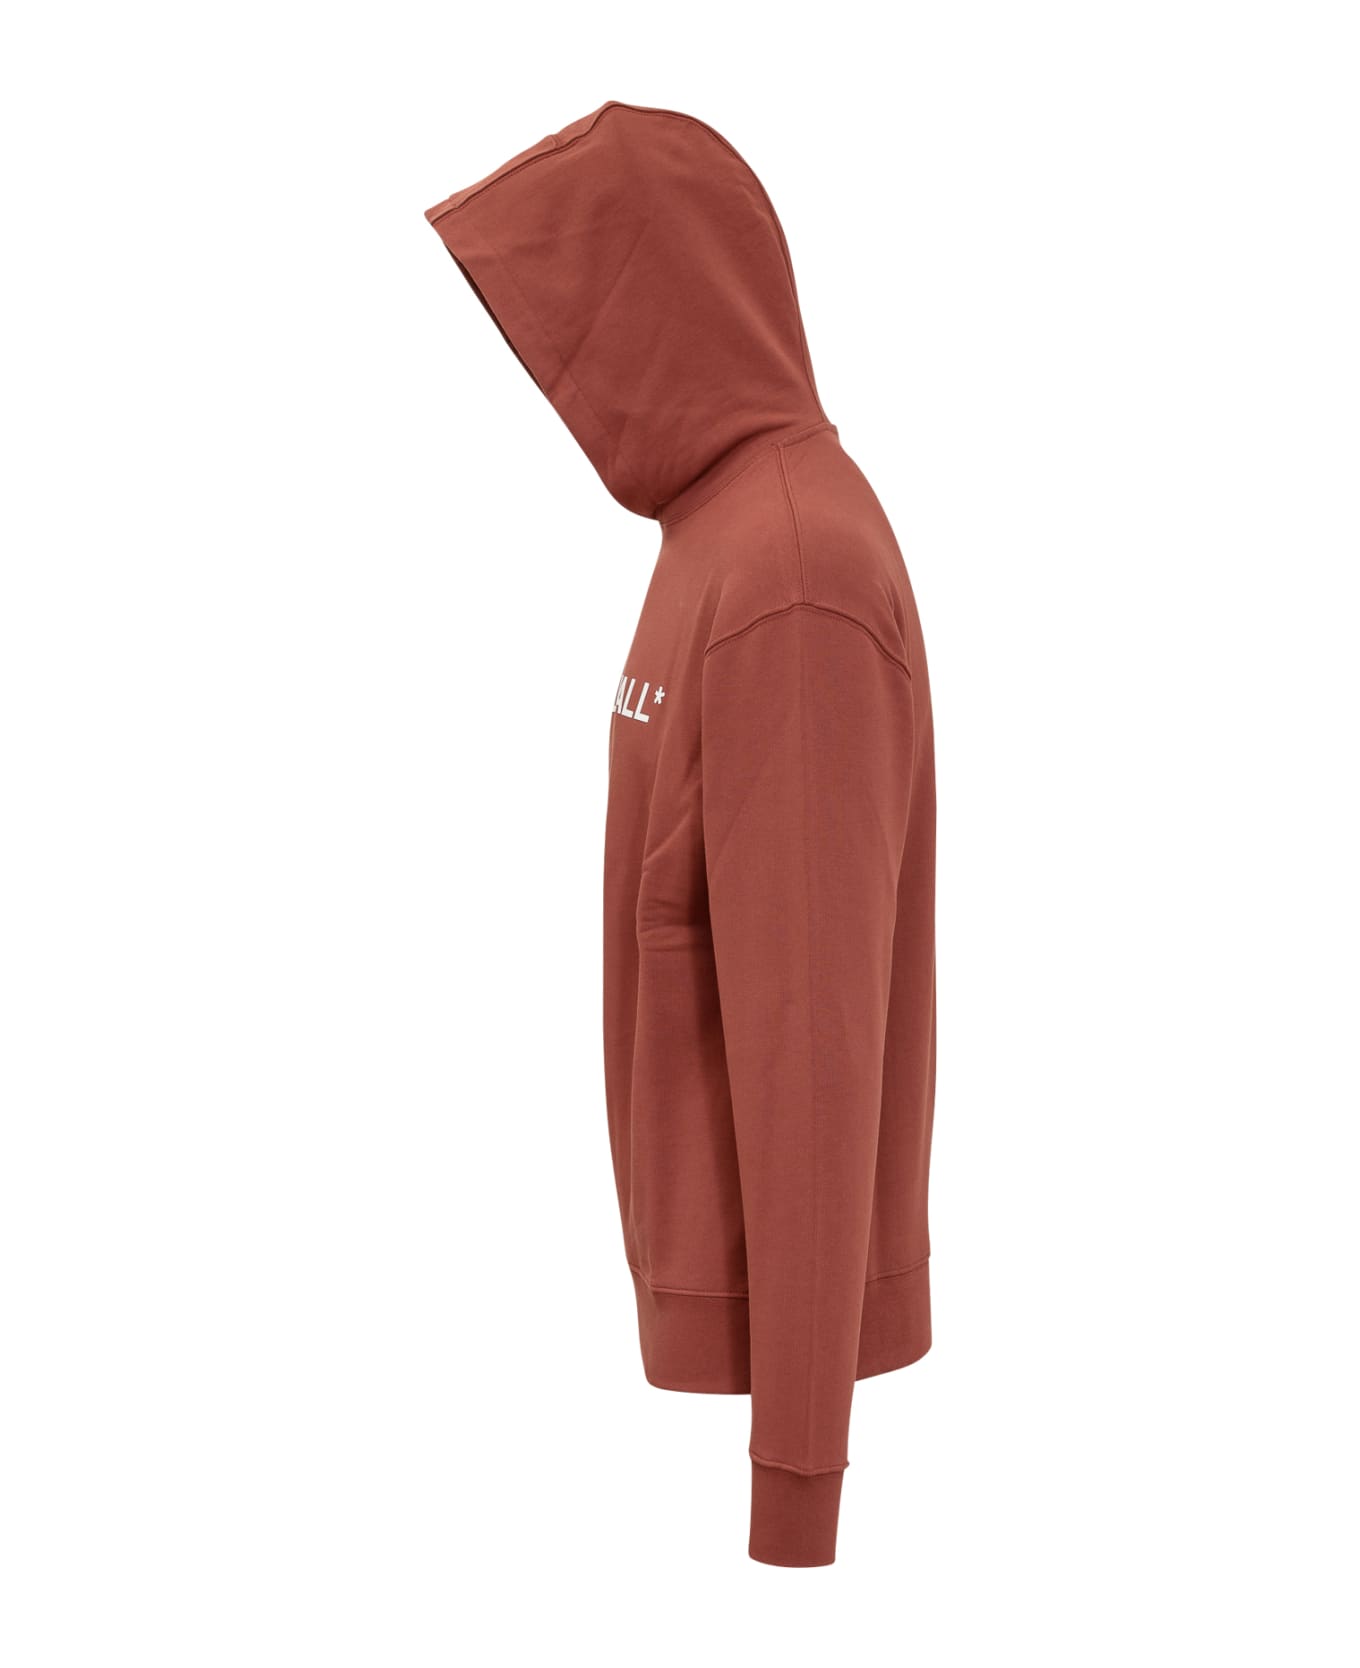 A-COLD-WALL Essential Hoodie - BURNT RED